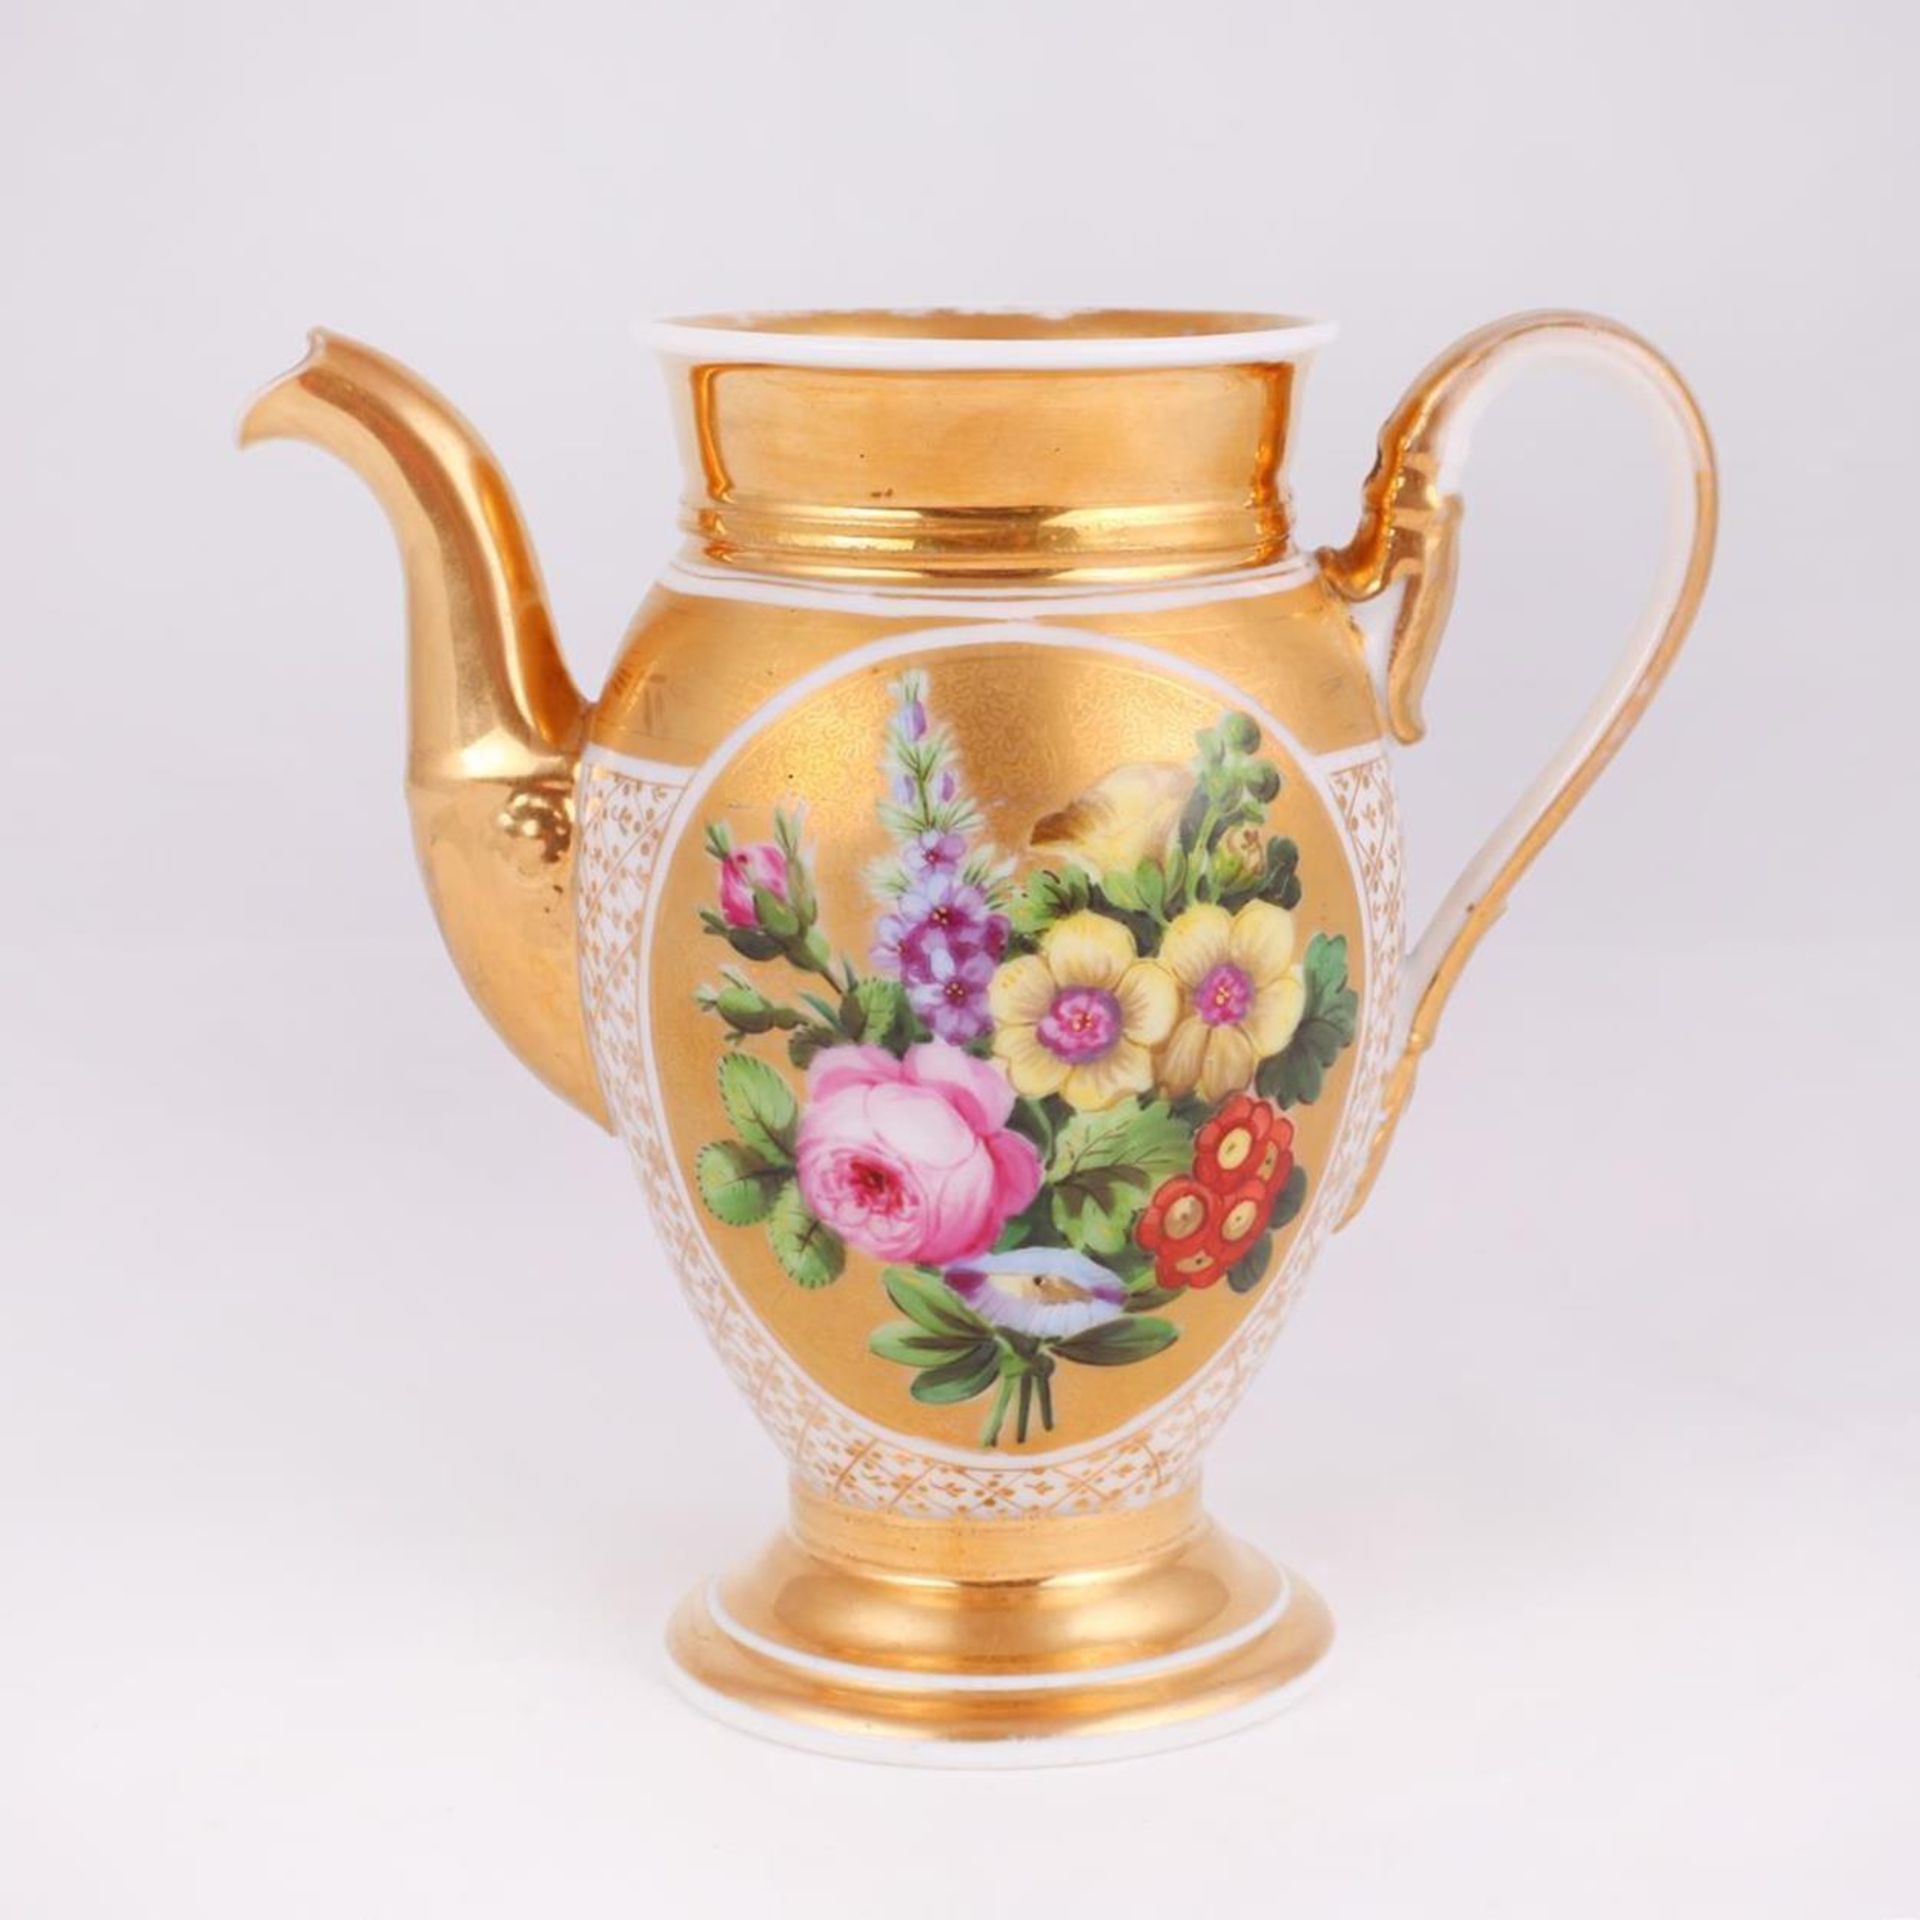 Teapot with the floral painting. [Popov].Popov Factory. 1830s. Porcelain, gilding, painting. - Image 5 of 7